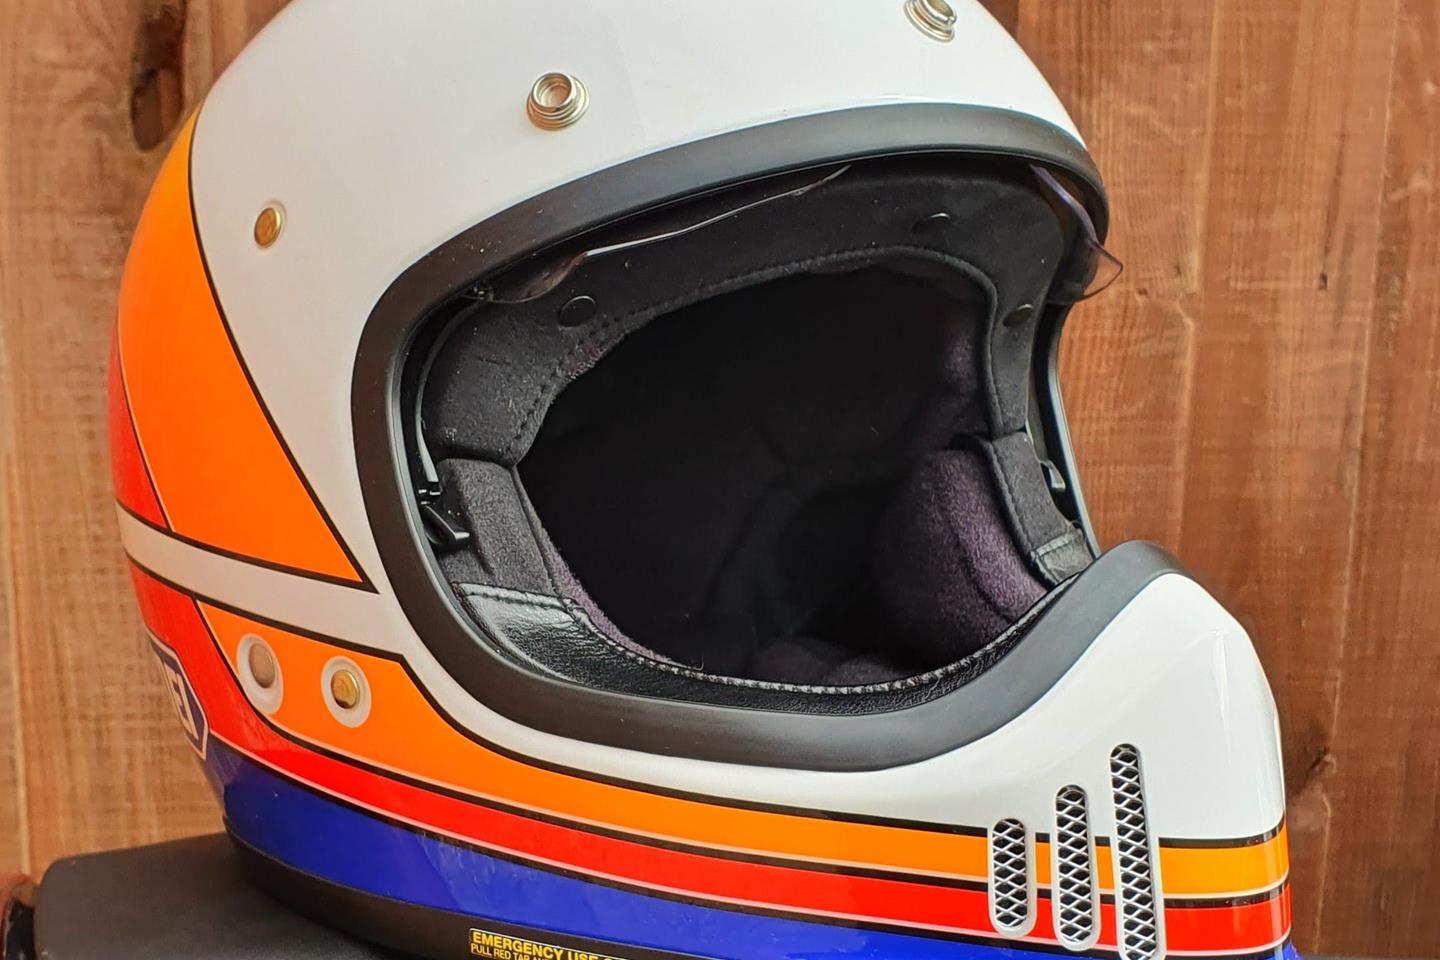 Helmet review: Shoei EX-Zero 'Equation' tried and tested | MCN